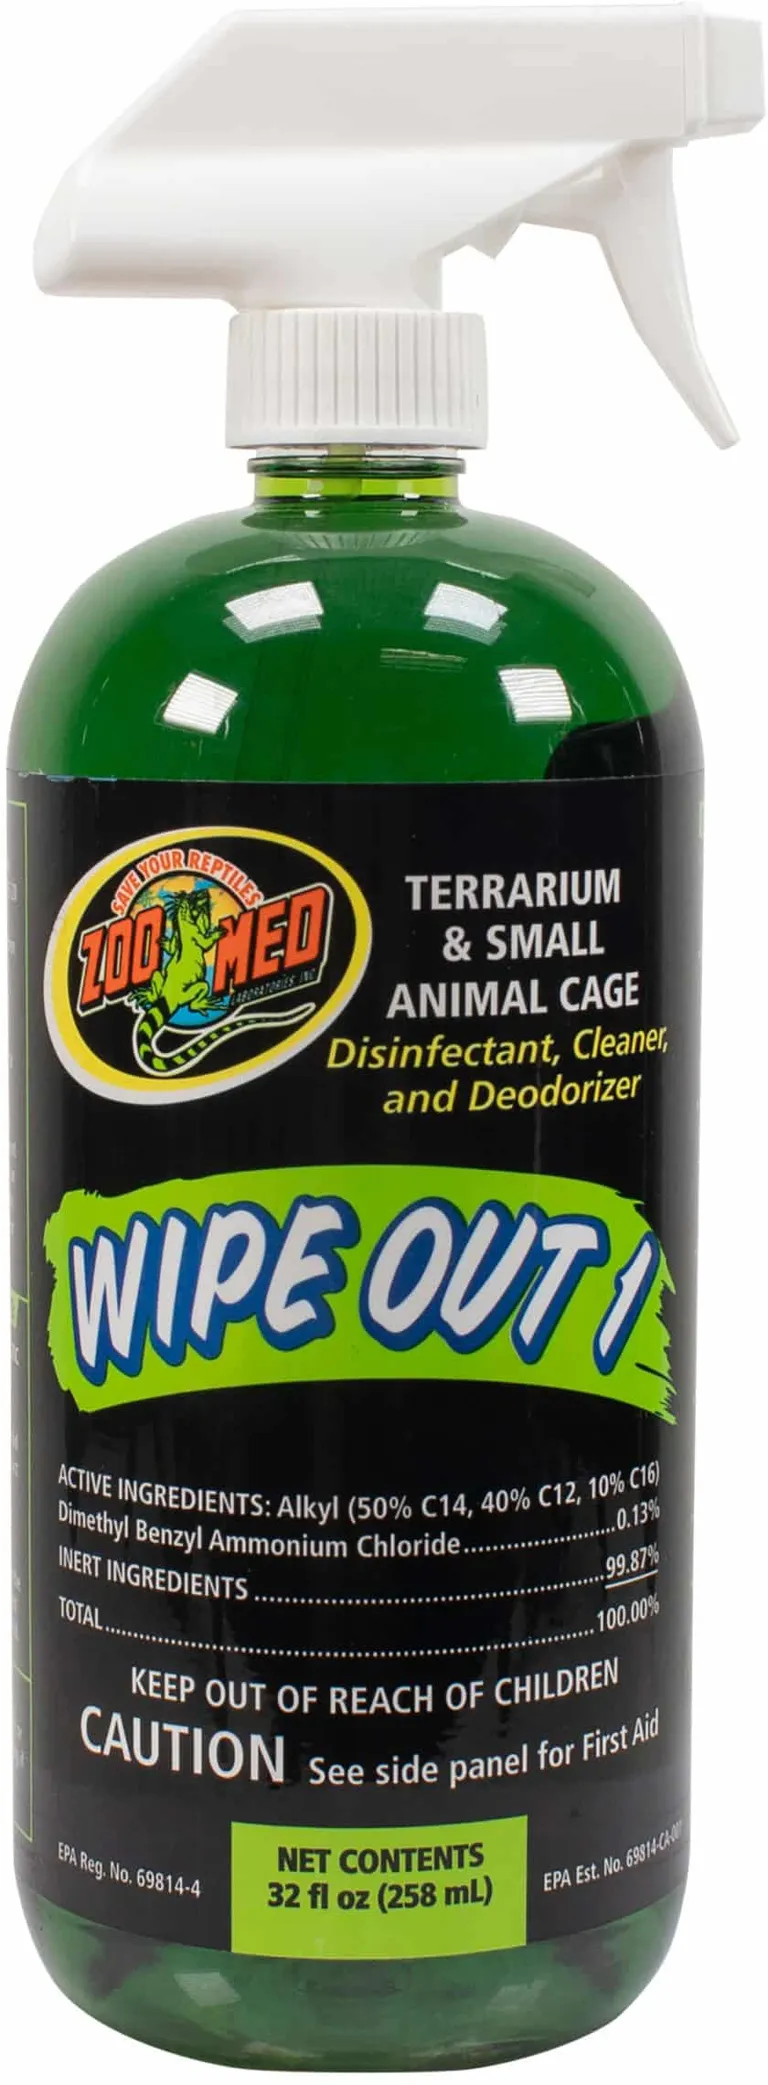 Zoo Med Wipe Out 1 Terrarium Cleaner, Disinfectant and Deodorizer Photo 2